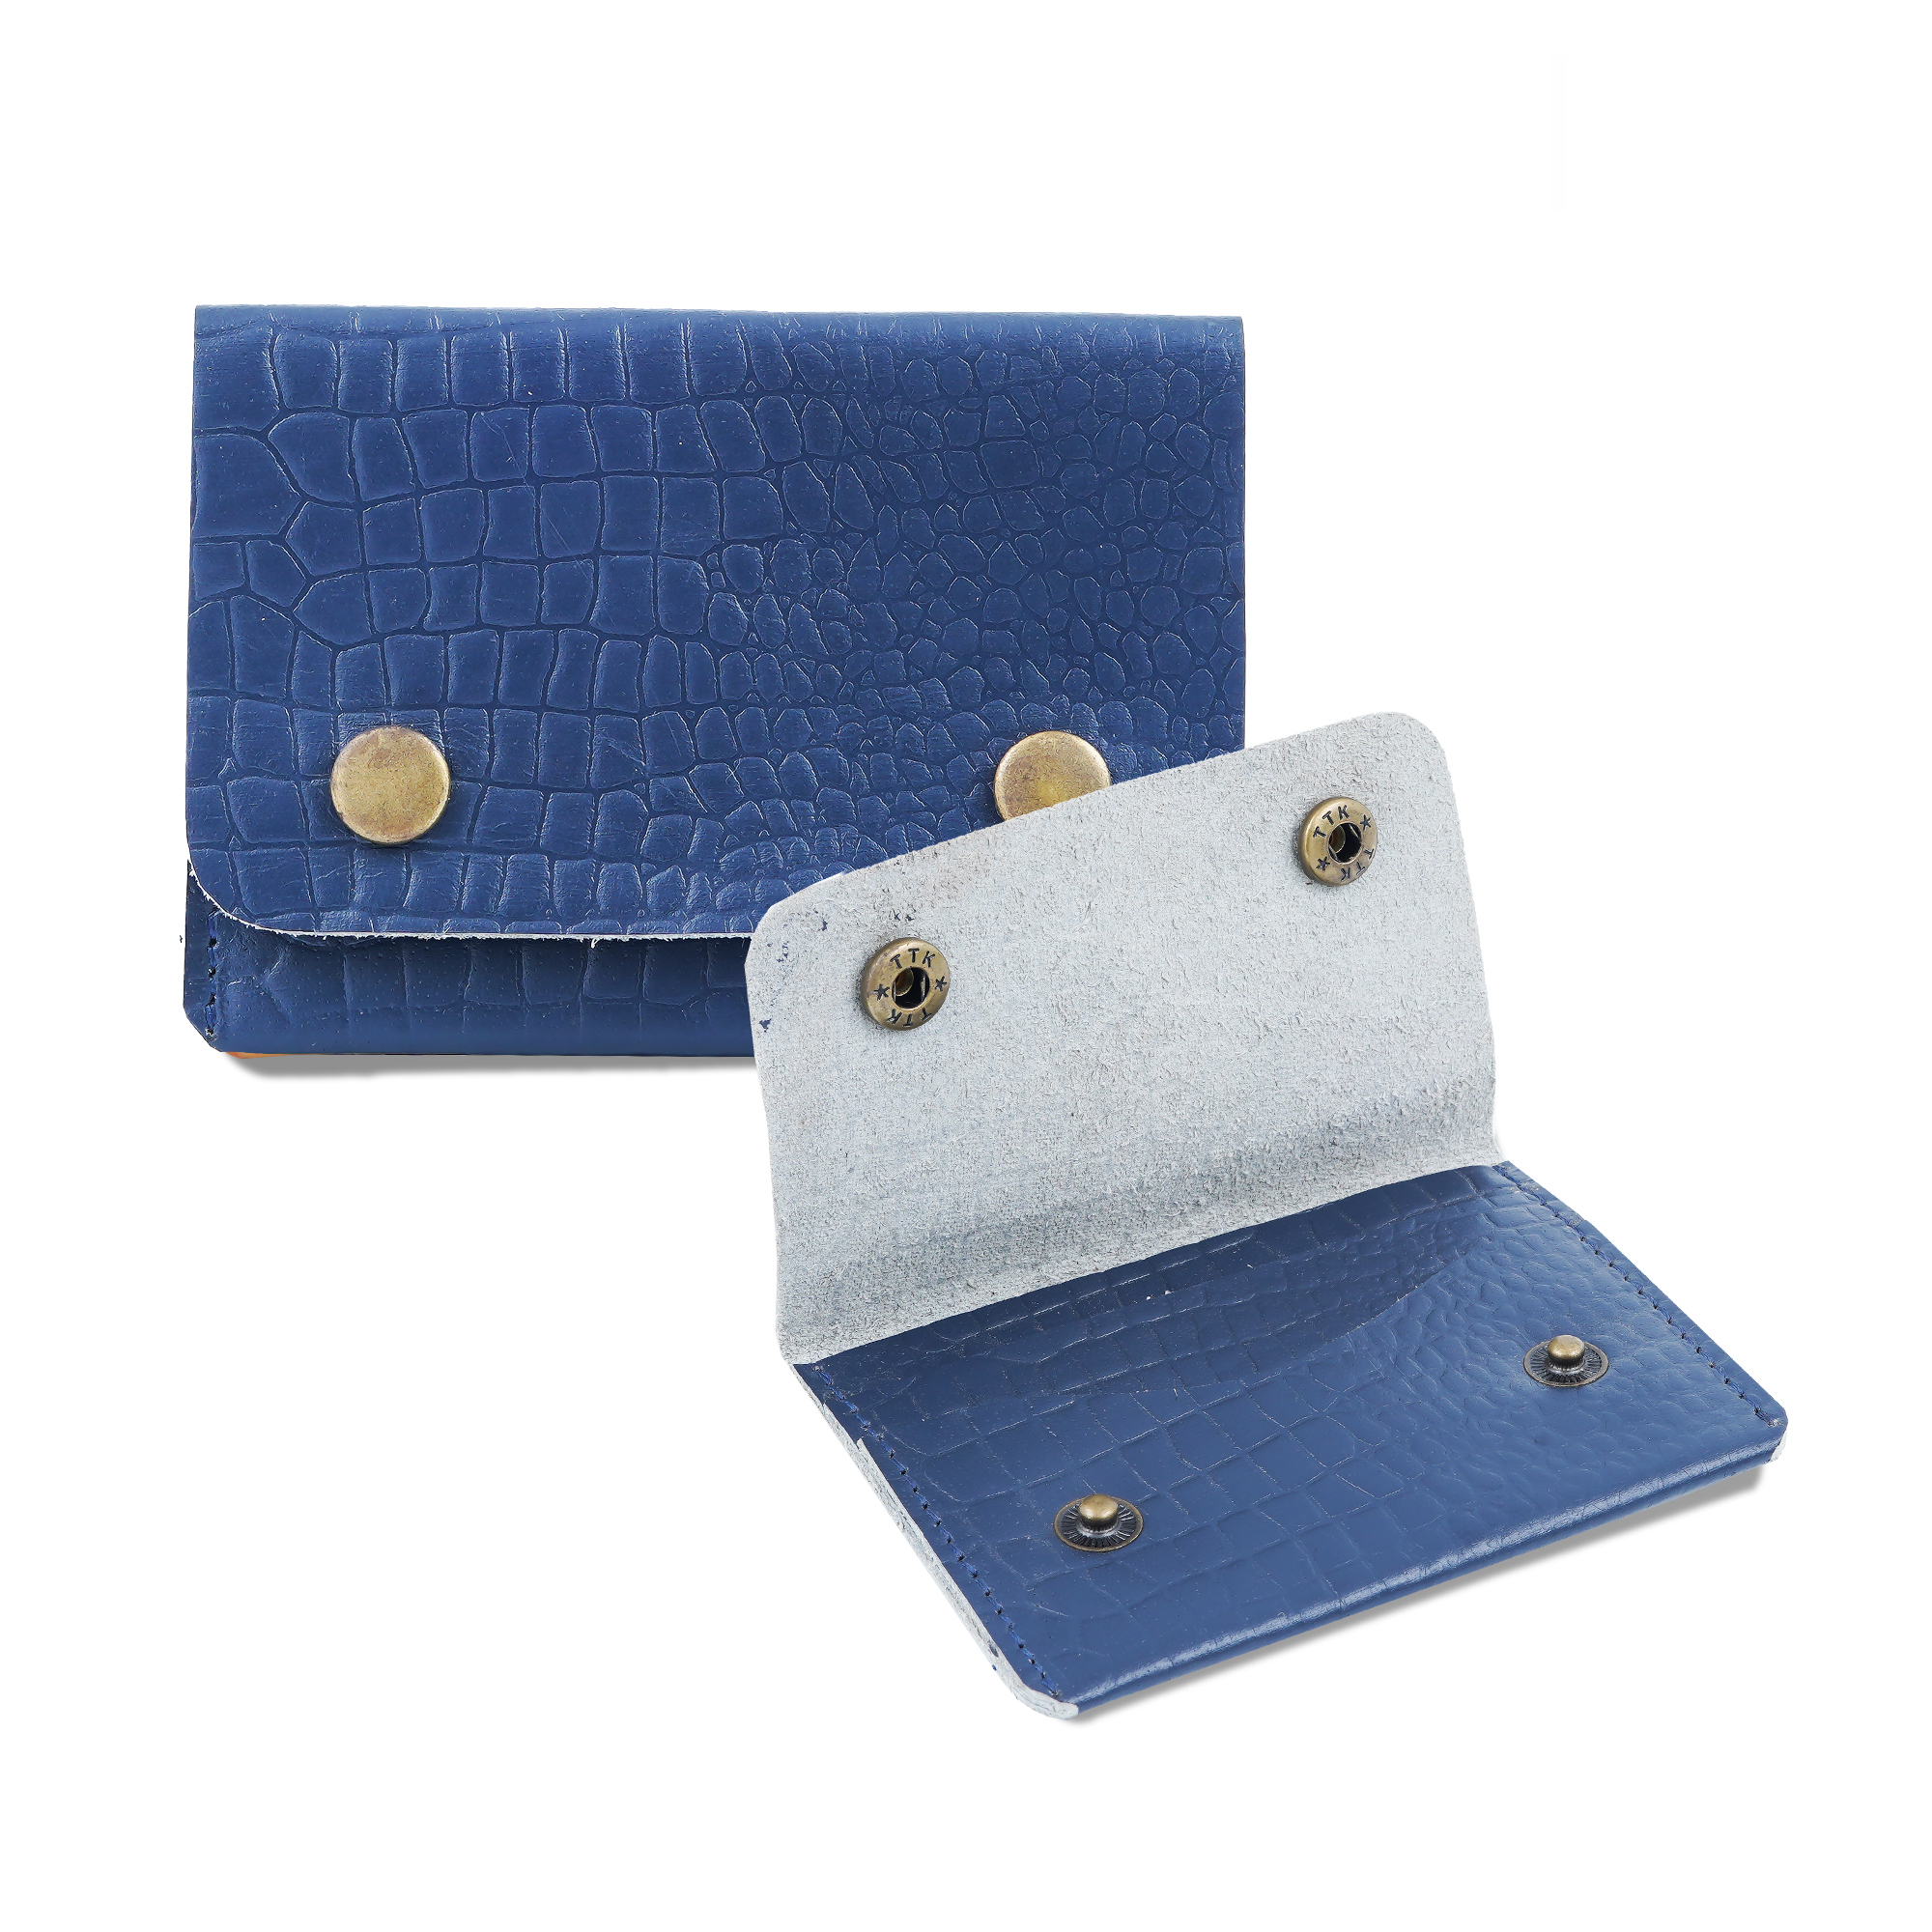 Leather Riveted Wallet for Men and Women | Blue Croco